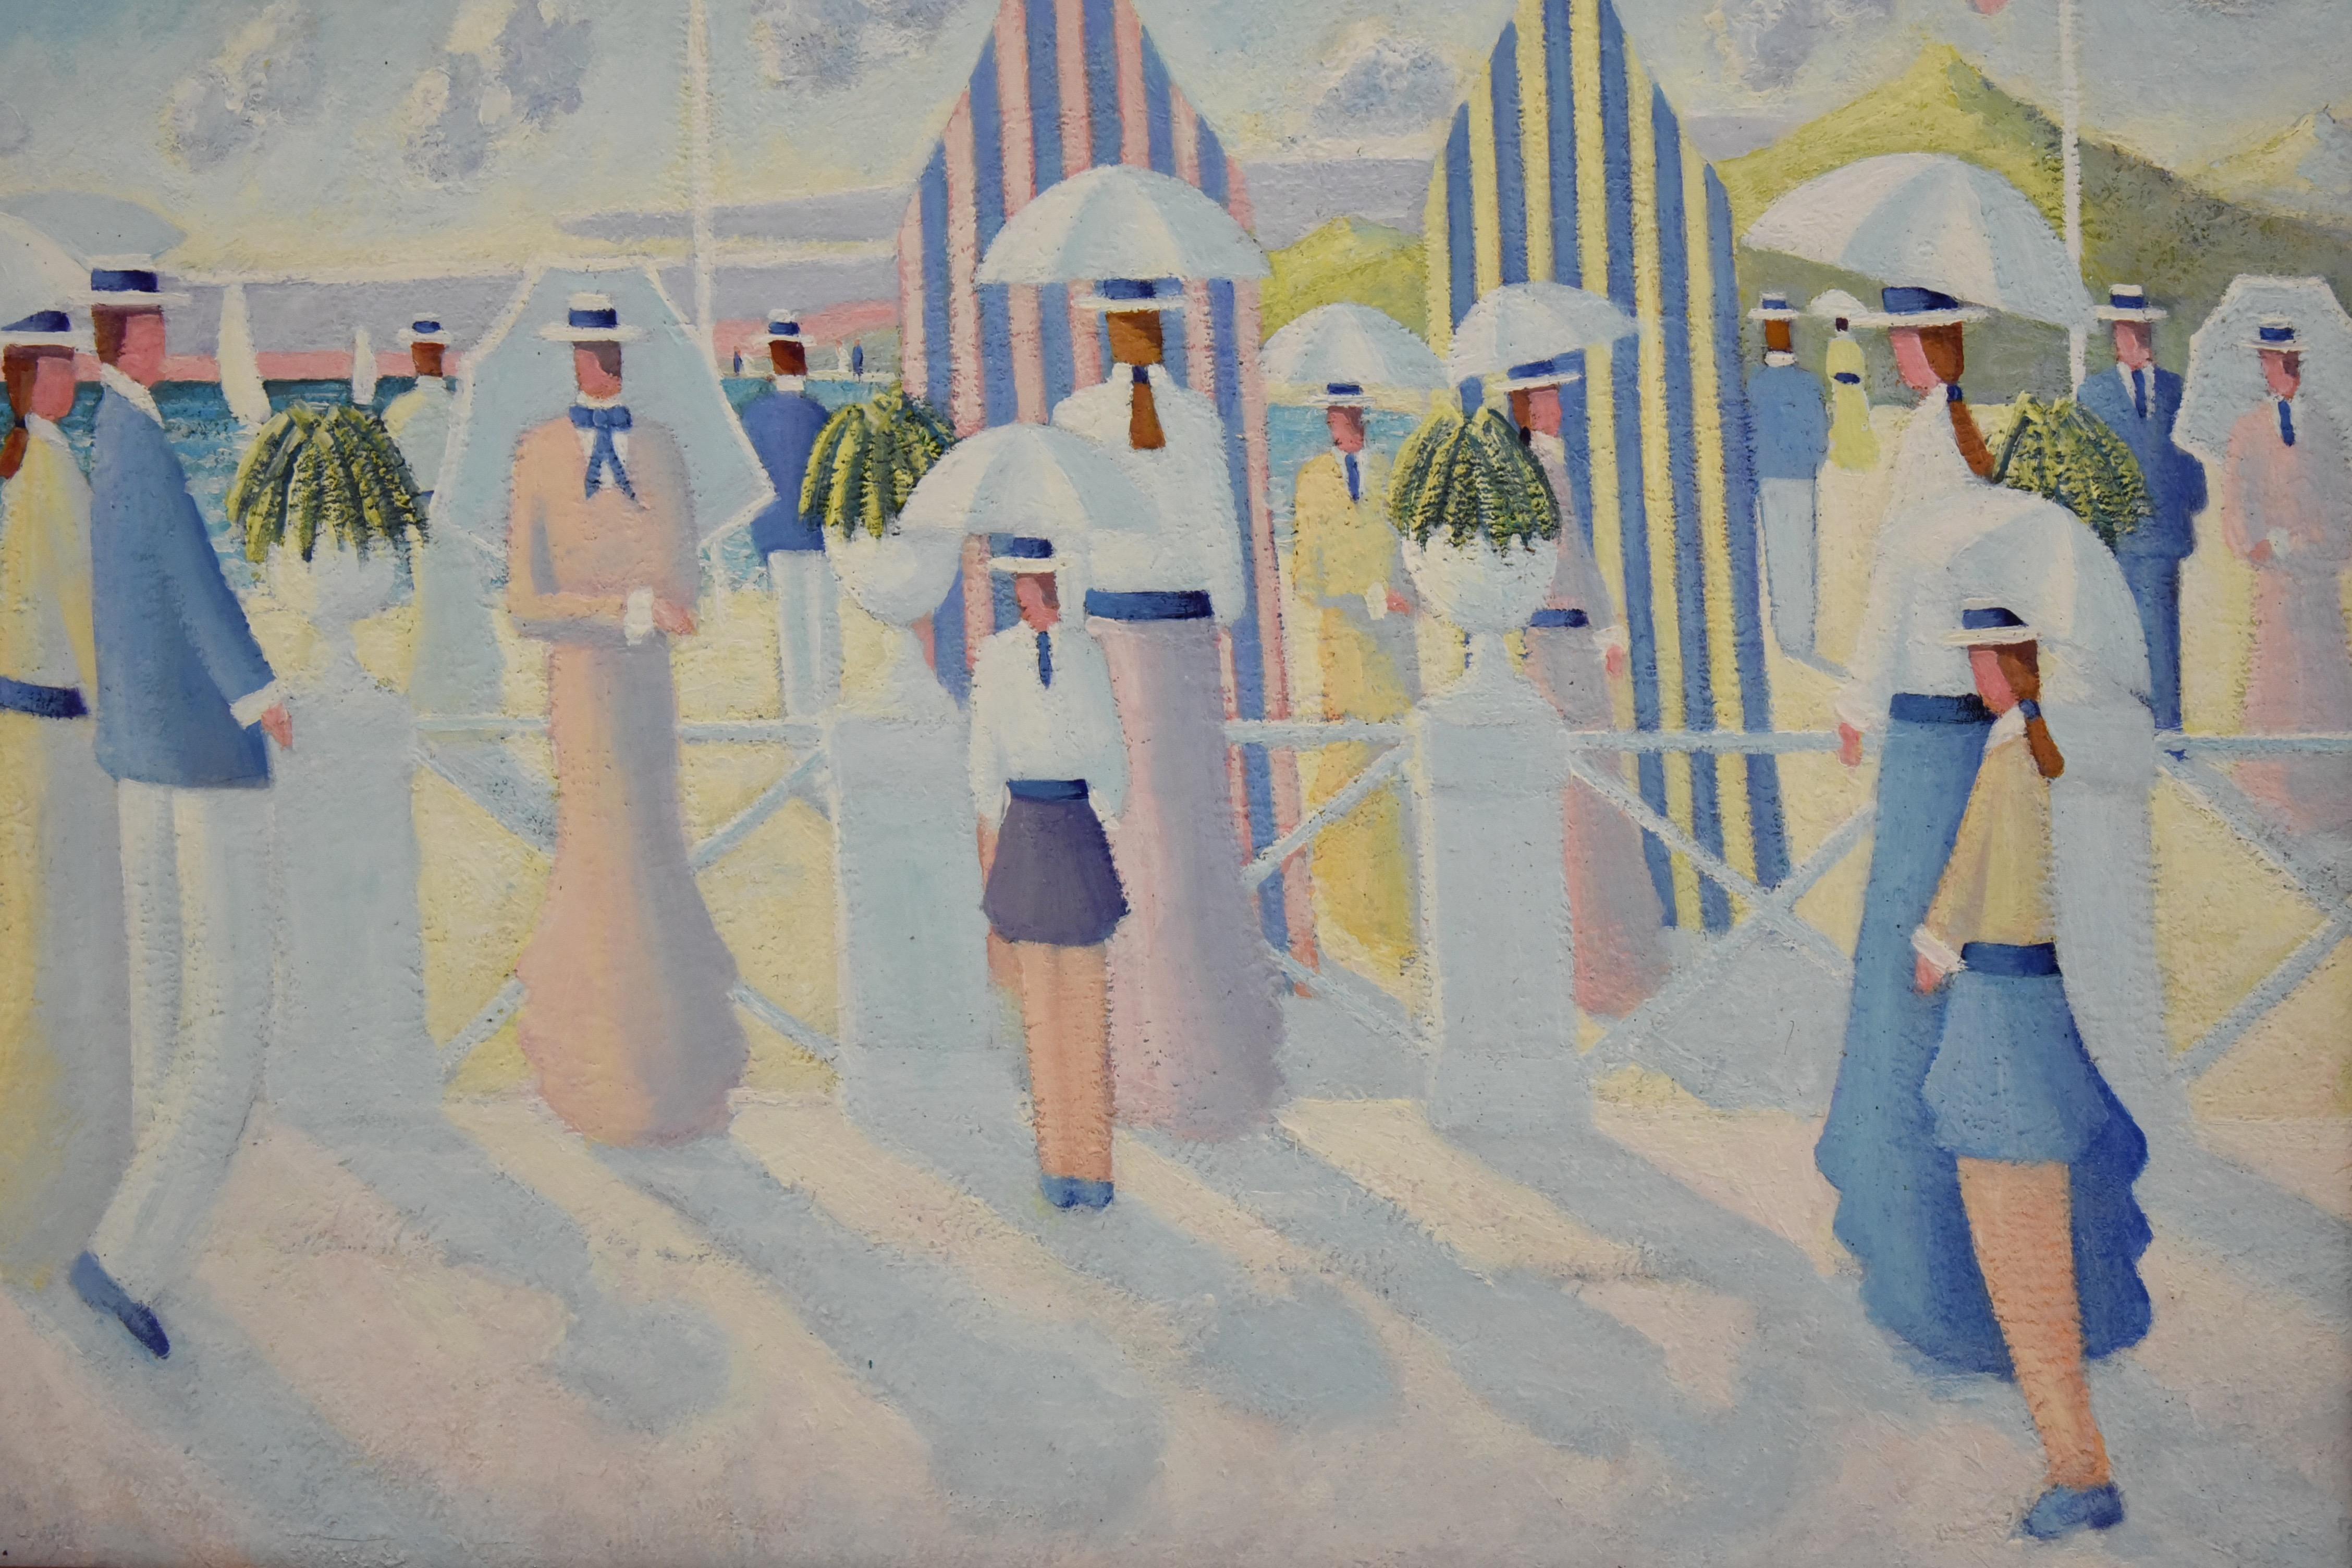 Mid-Century Modern Painting of People on the Beach Promenade Deauville France by Paul Frans